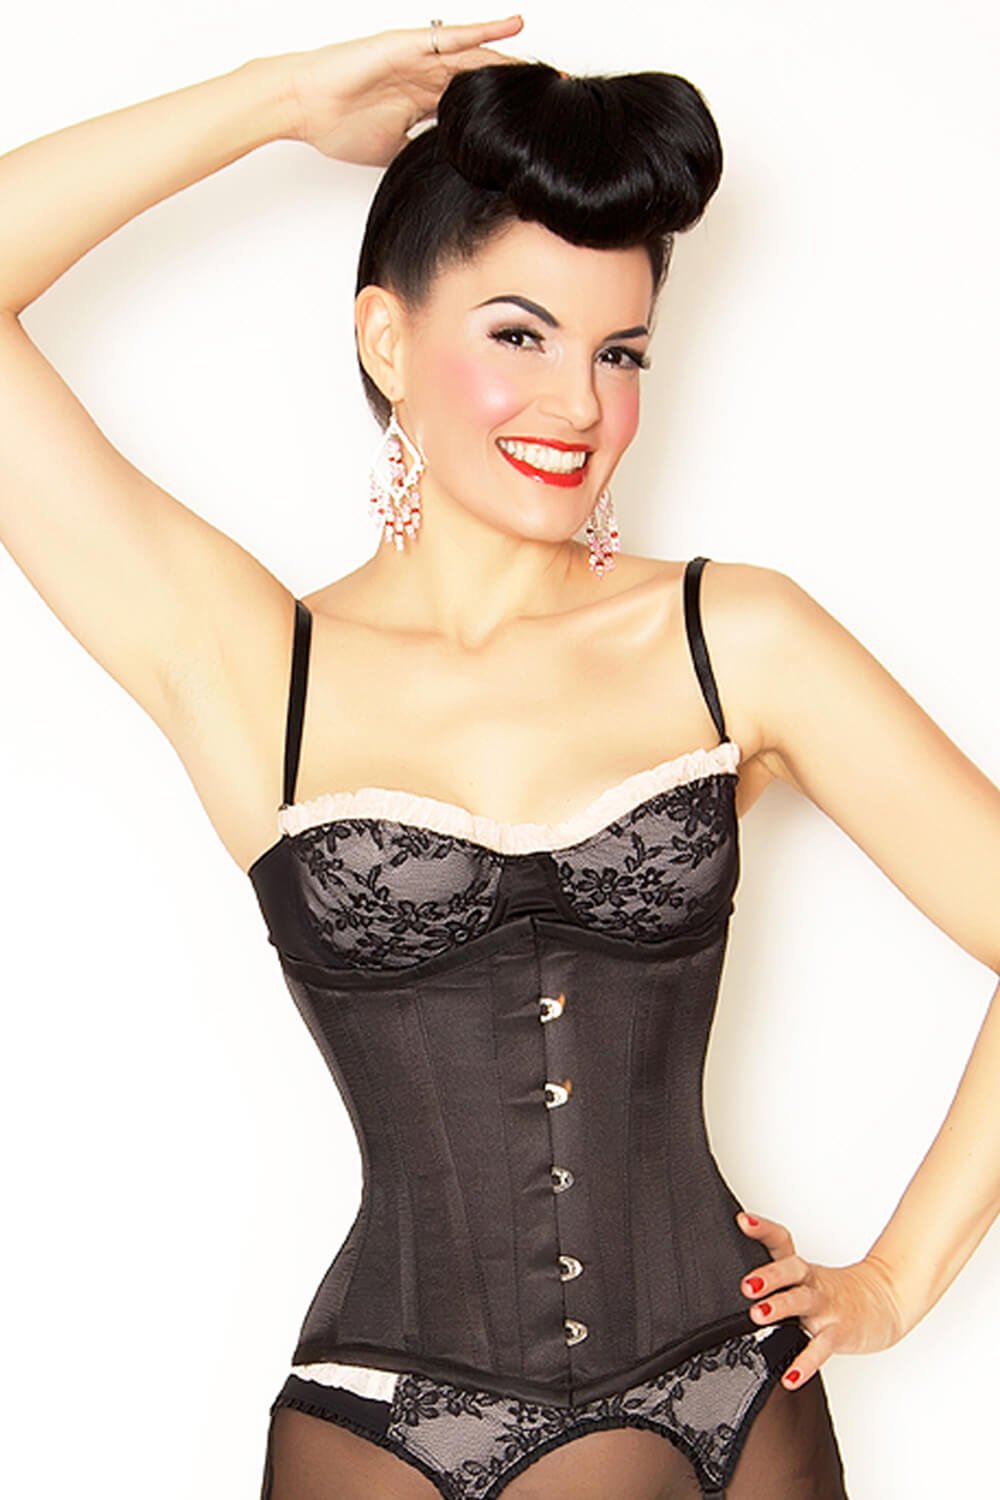 VG LONDON LTD: Waist Training in Bespoke Corset, Made just for your body !